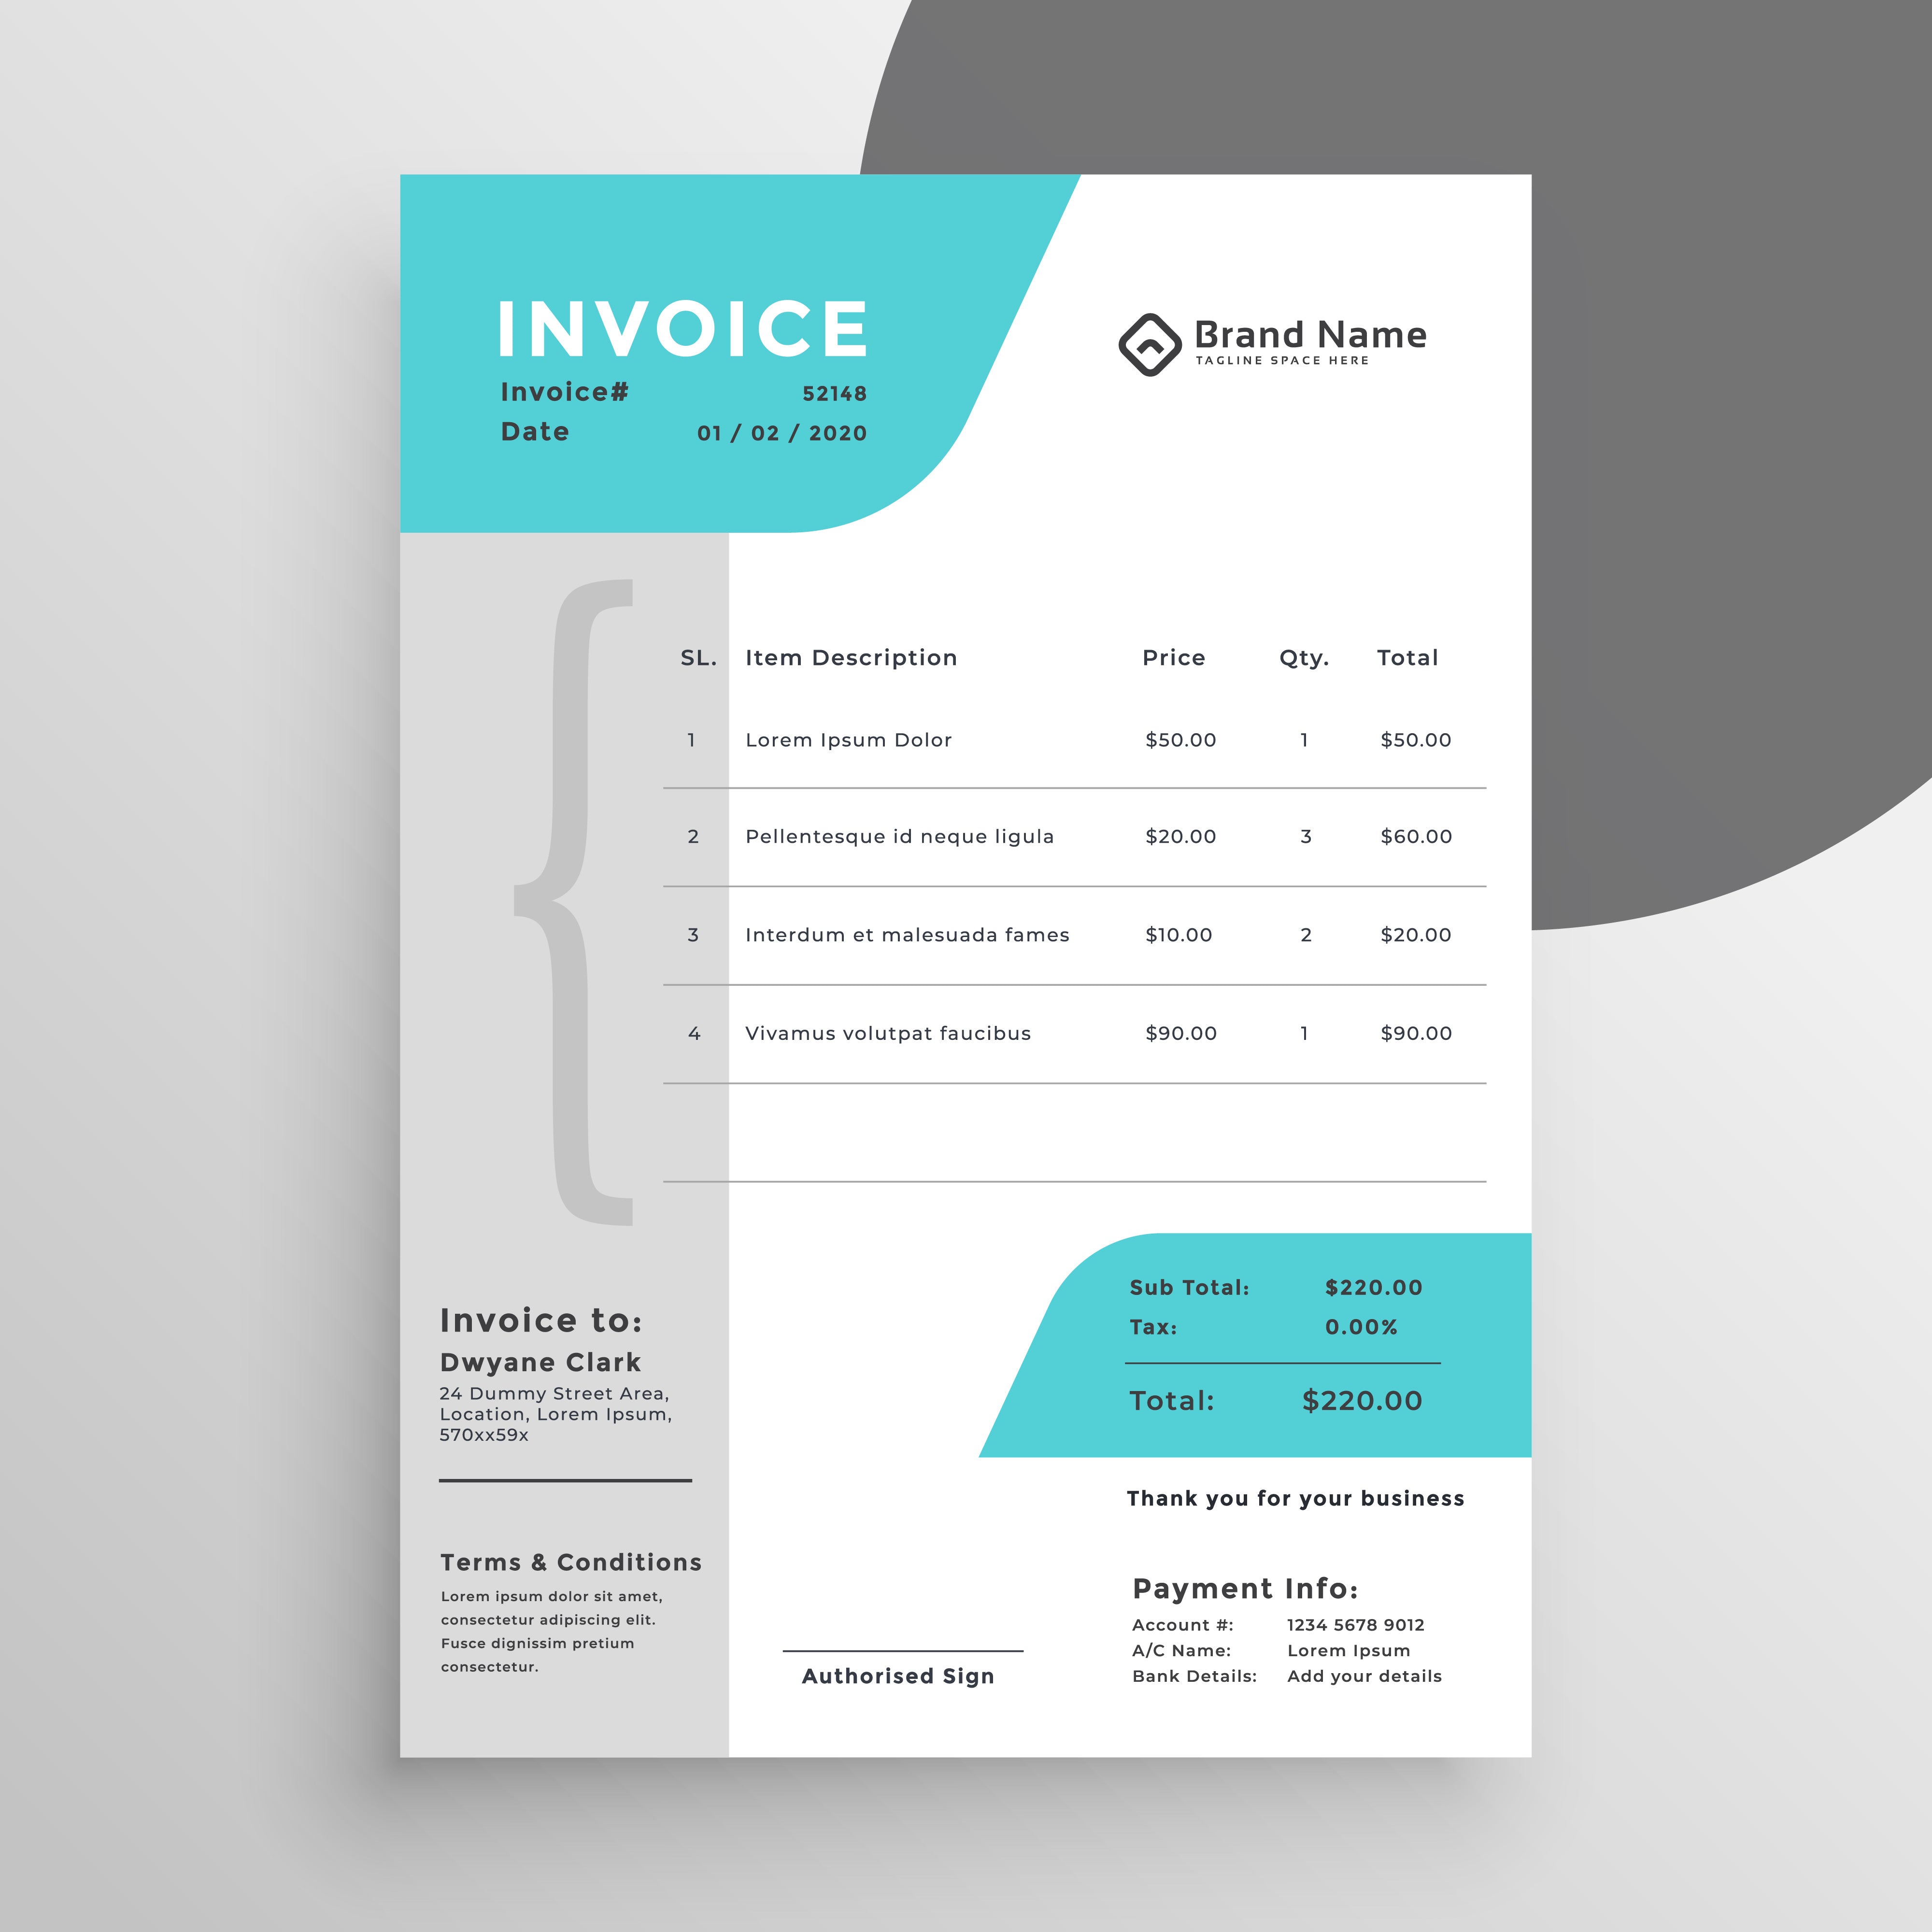 MG Invoice Template V2 for Excel